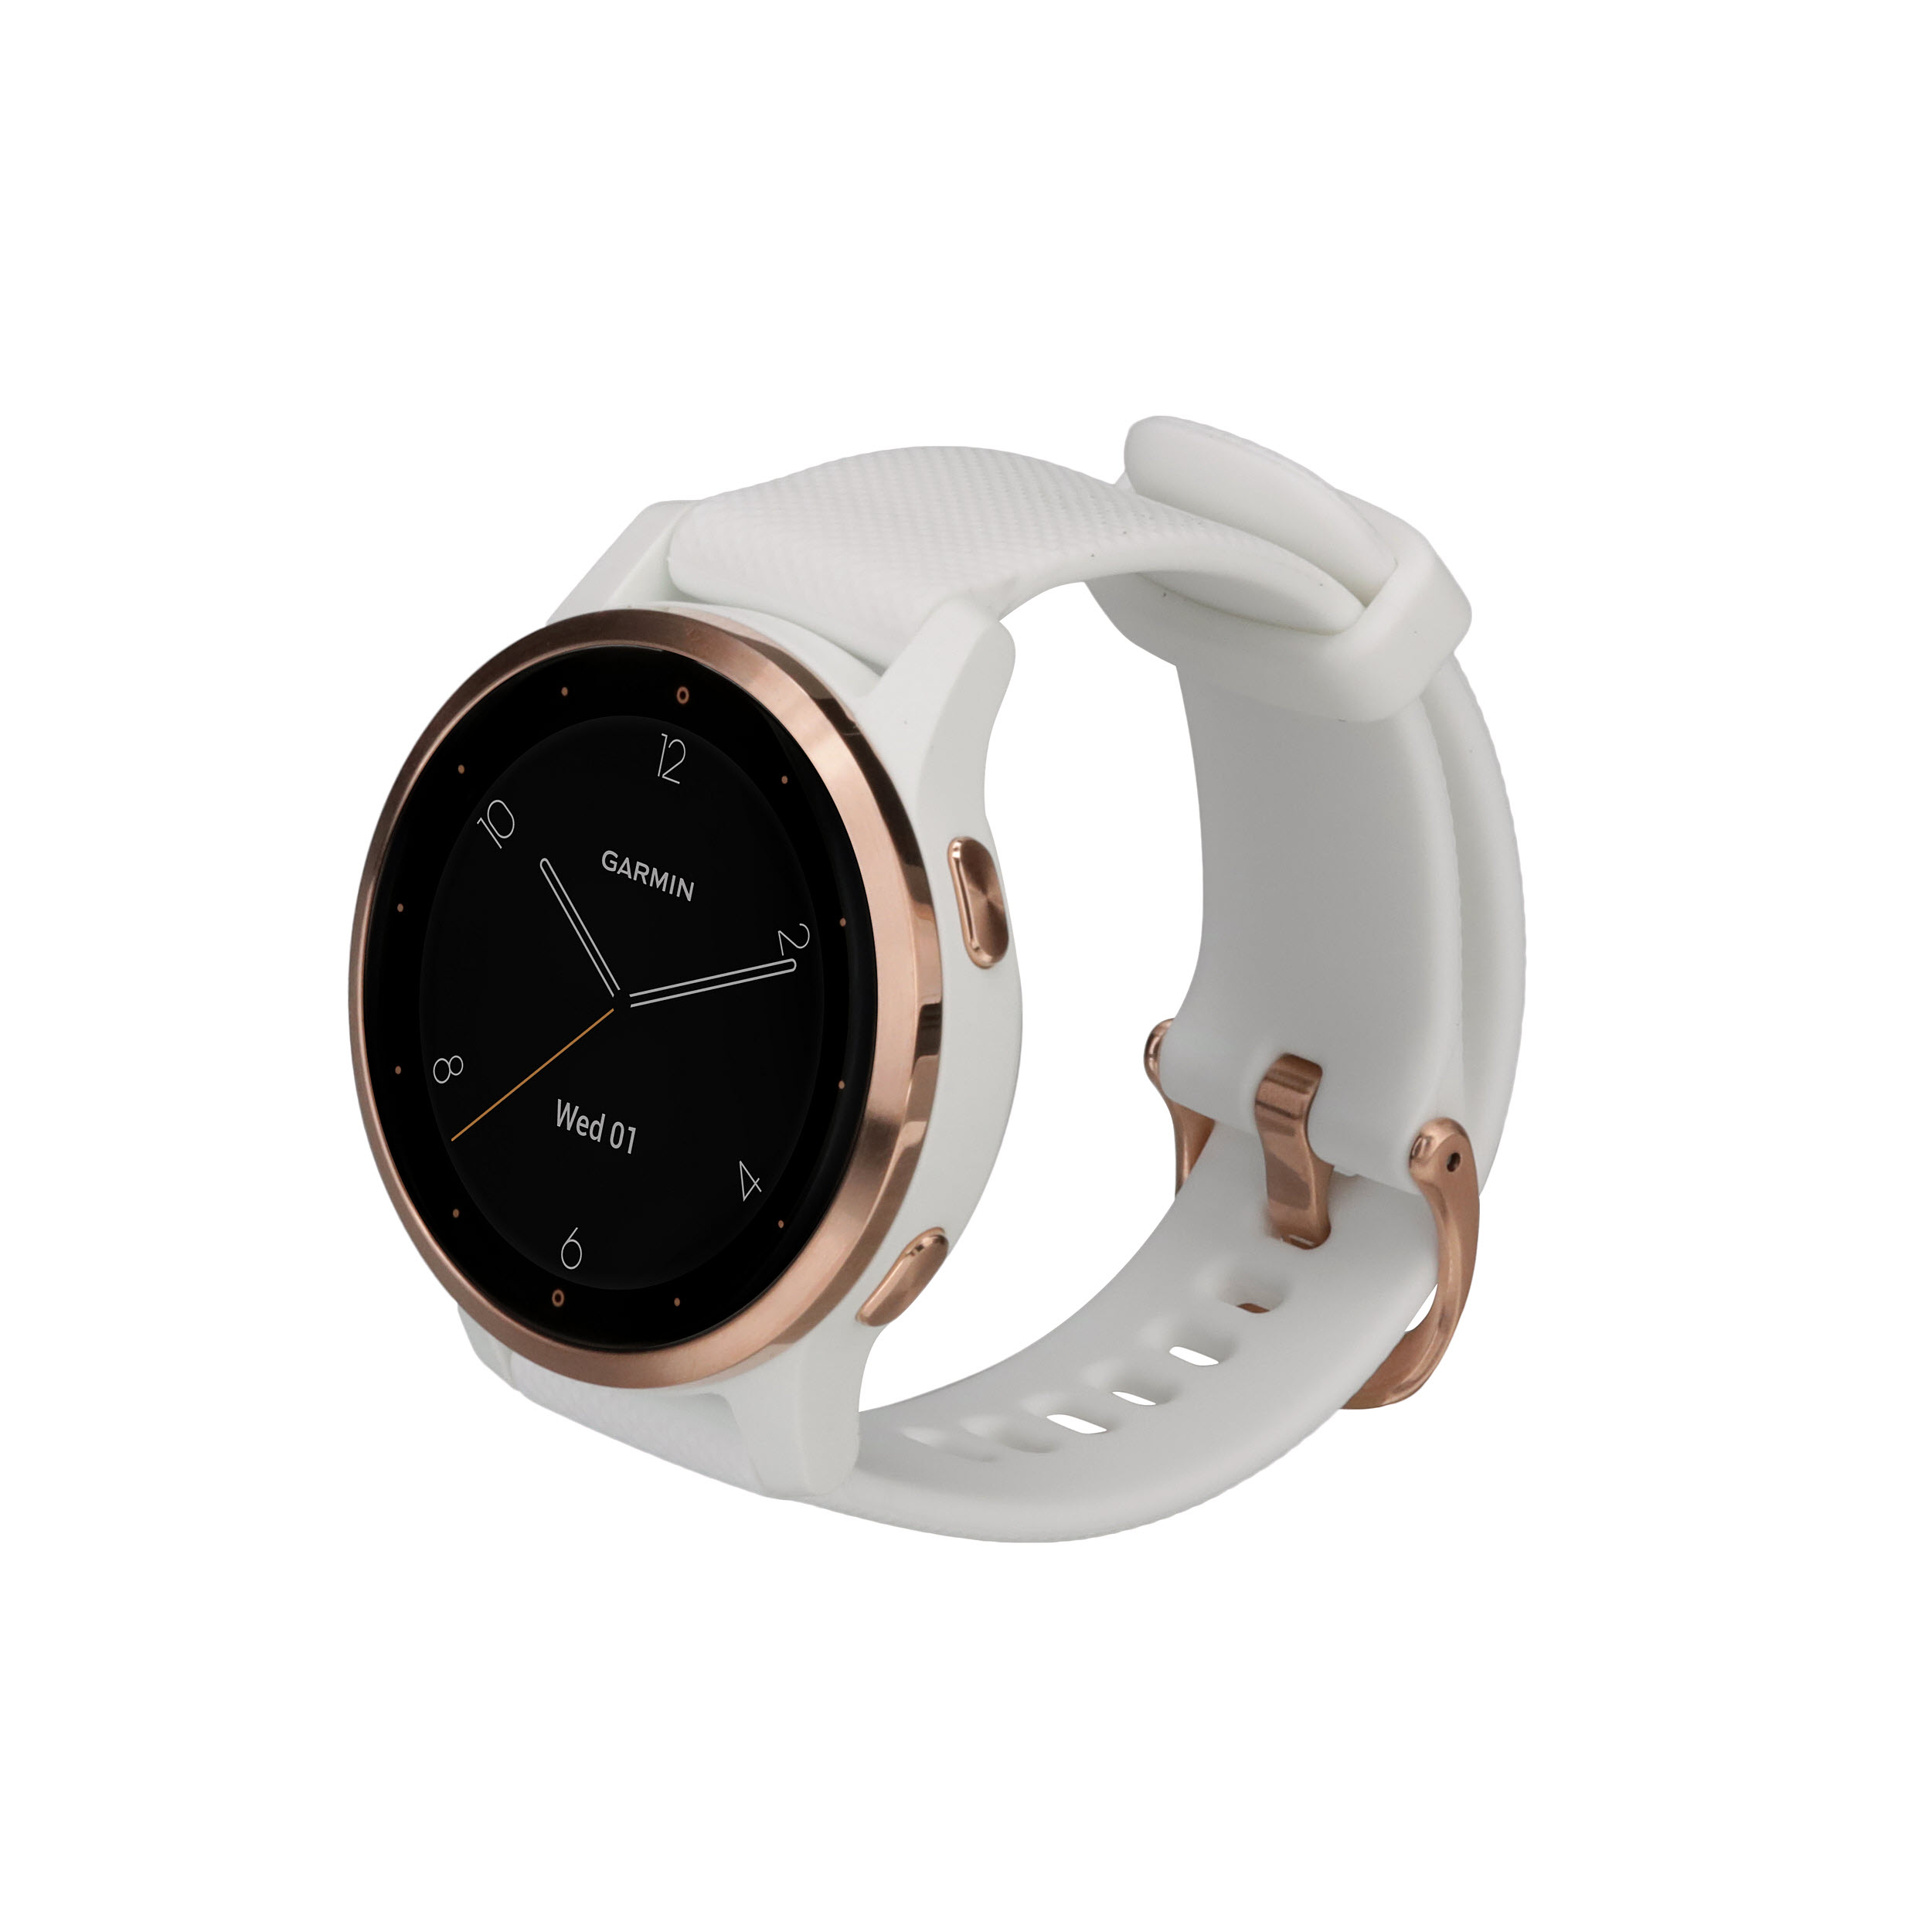  Garmin vivoactive 4S, Smaller-Sized GPS Smartwatch, Features  Music, Body Energy Monitoring, Animated Workouts, Pulse Ox Sensors, Rose  Gold with White Band : Clothing, Shoes & Jewelry